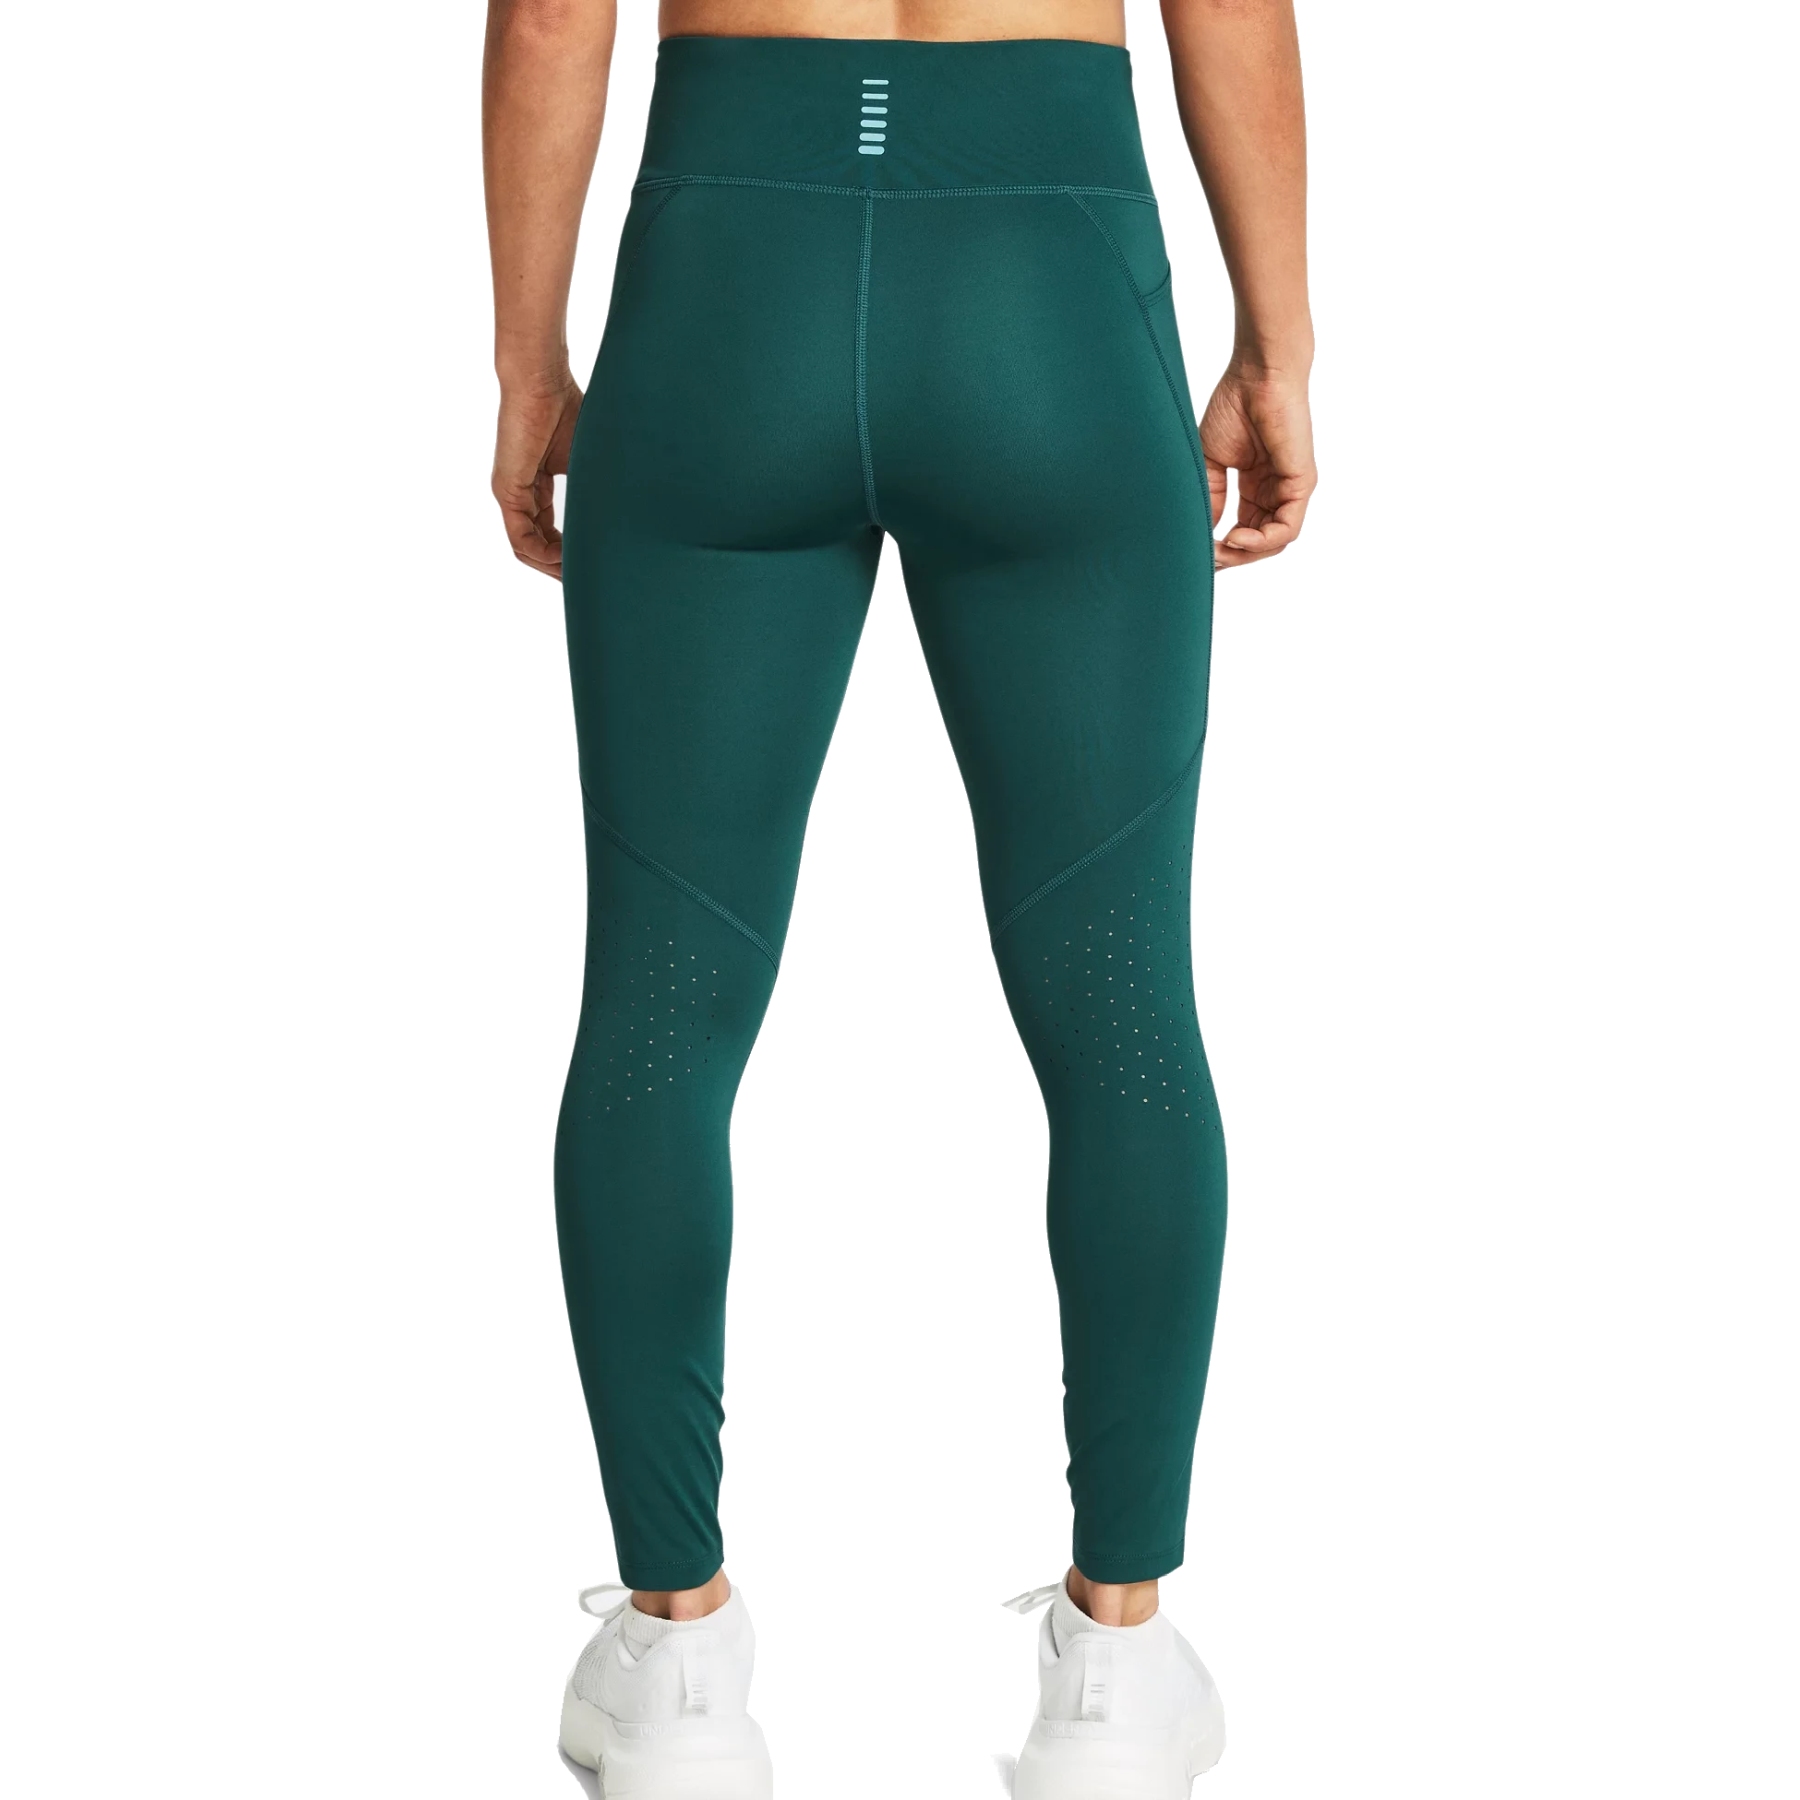 Under Armour UA Fly Fast 3.0 Ankle Tights Women - Hydro Teal/Hydro Teal/ Reflective